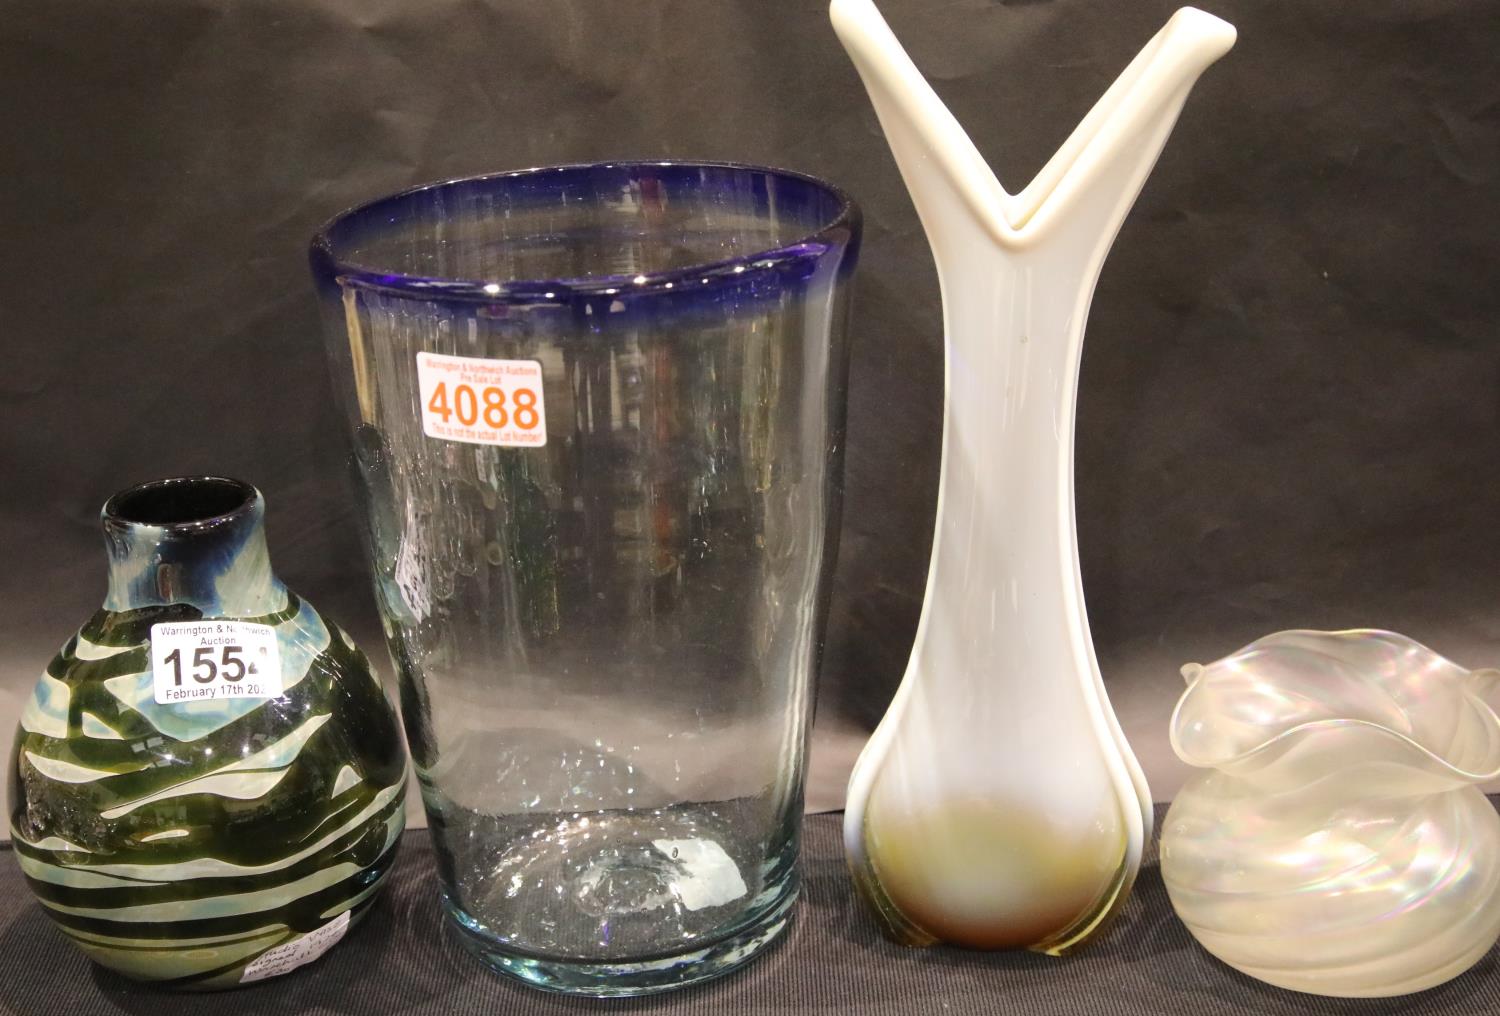 Four studio glass vases. P&P Group 3 (£25+VAT for the first lot and £5+VAT for subsequent lots)